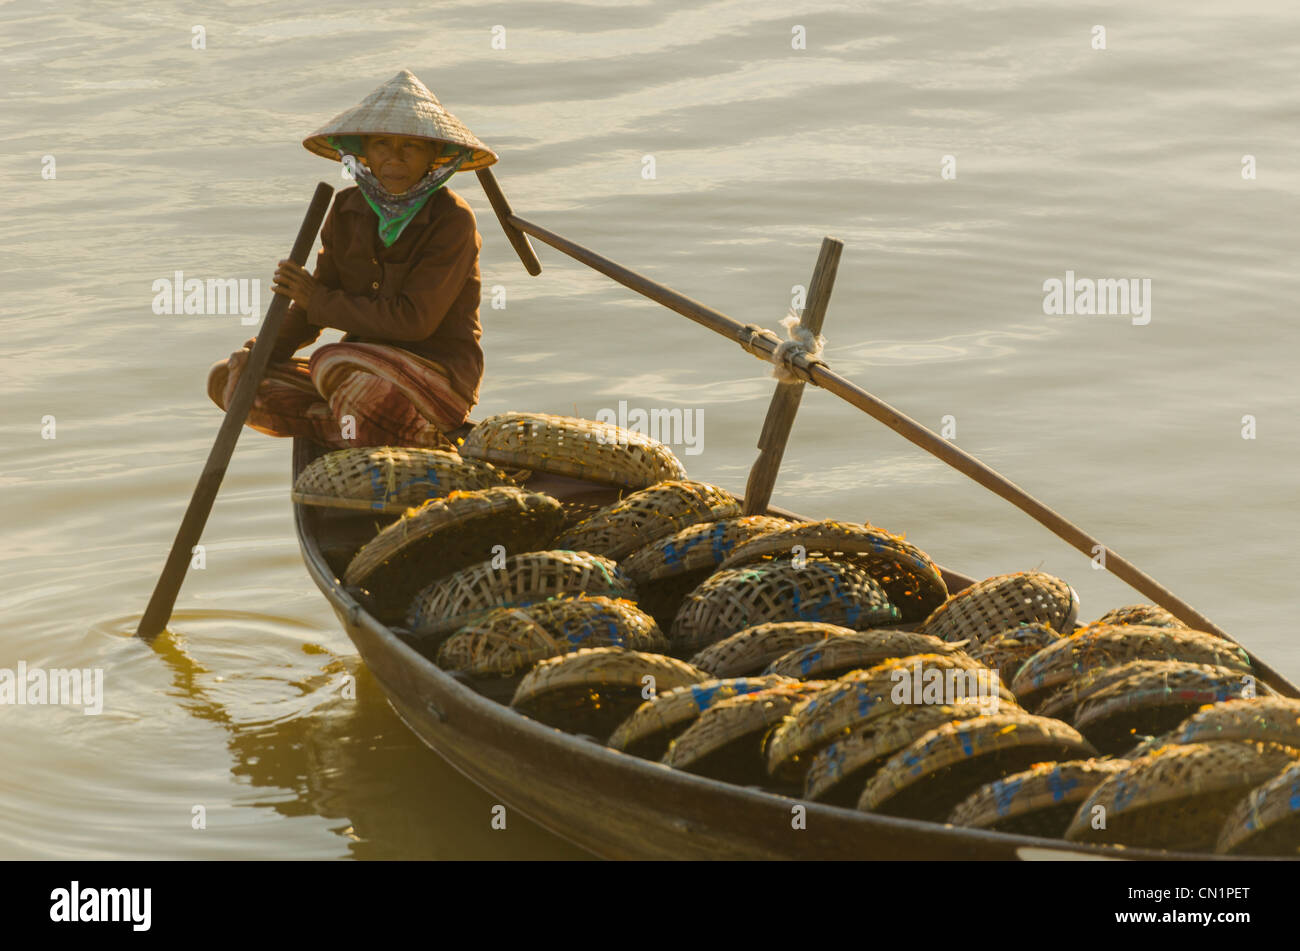 Vietnamese Woman in Conical Hat Rows Boat Filled with Fishing Baskets Stock Photo